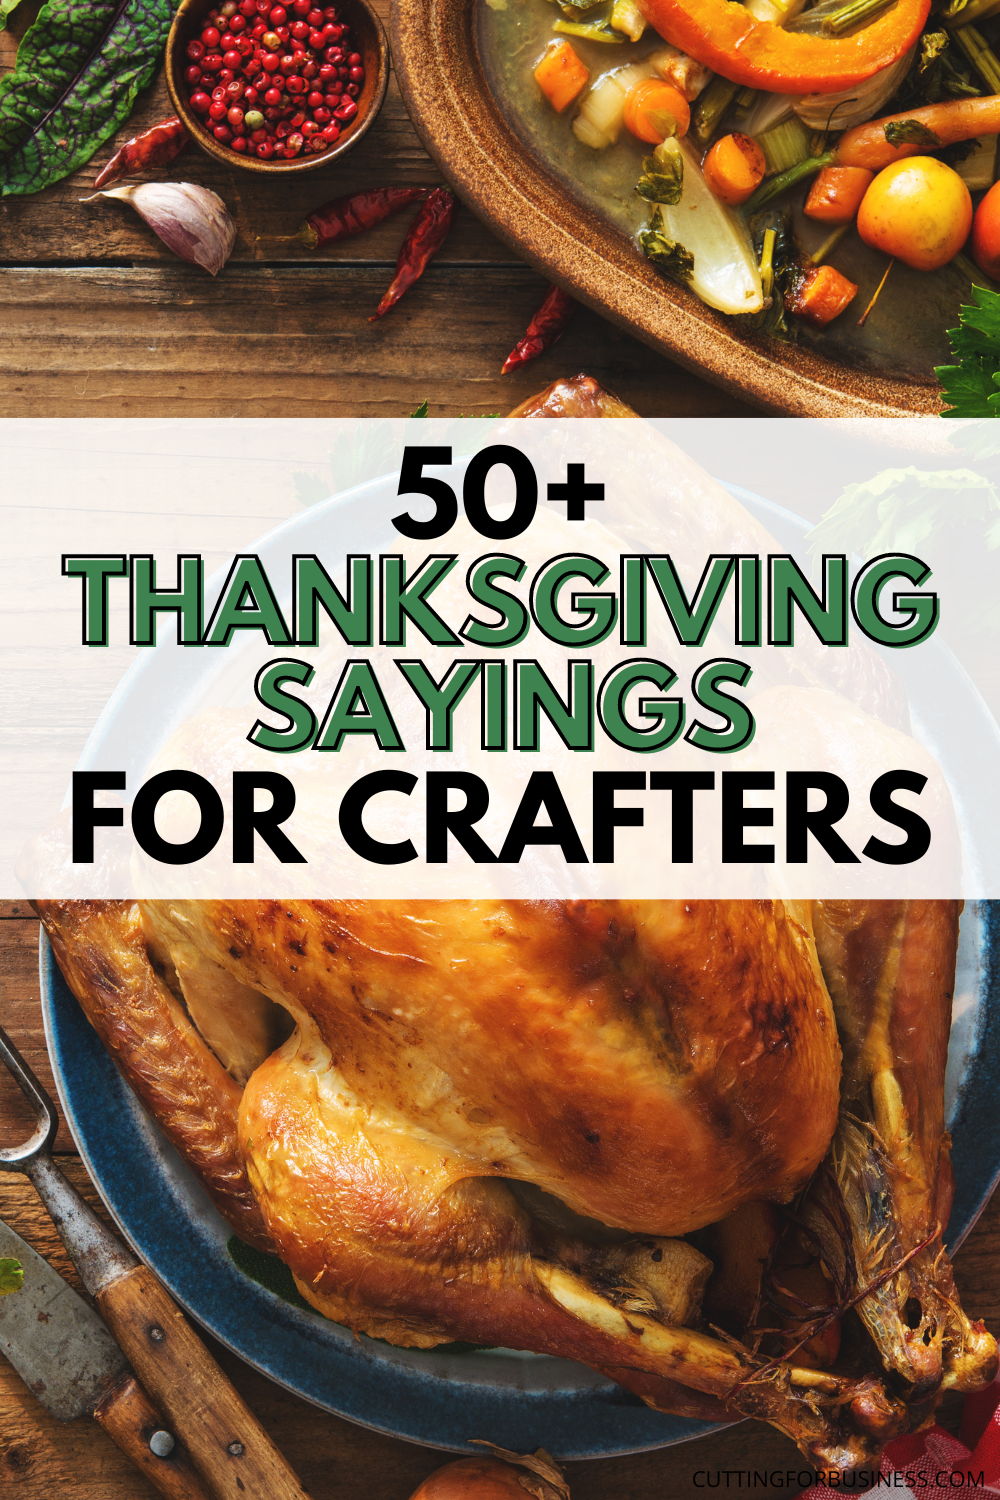 50+ Thanksgiving Sayings for Crafters - cuttingforbusiness.com